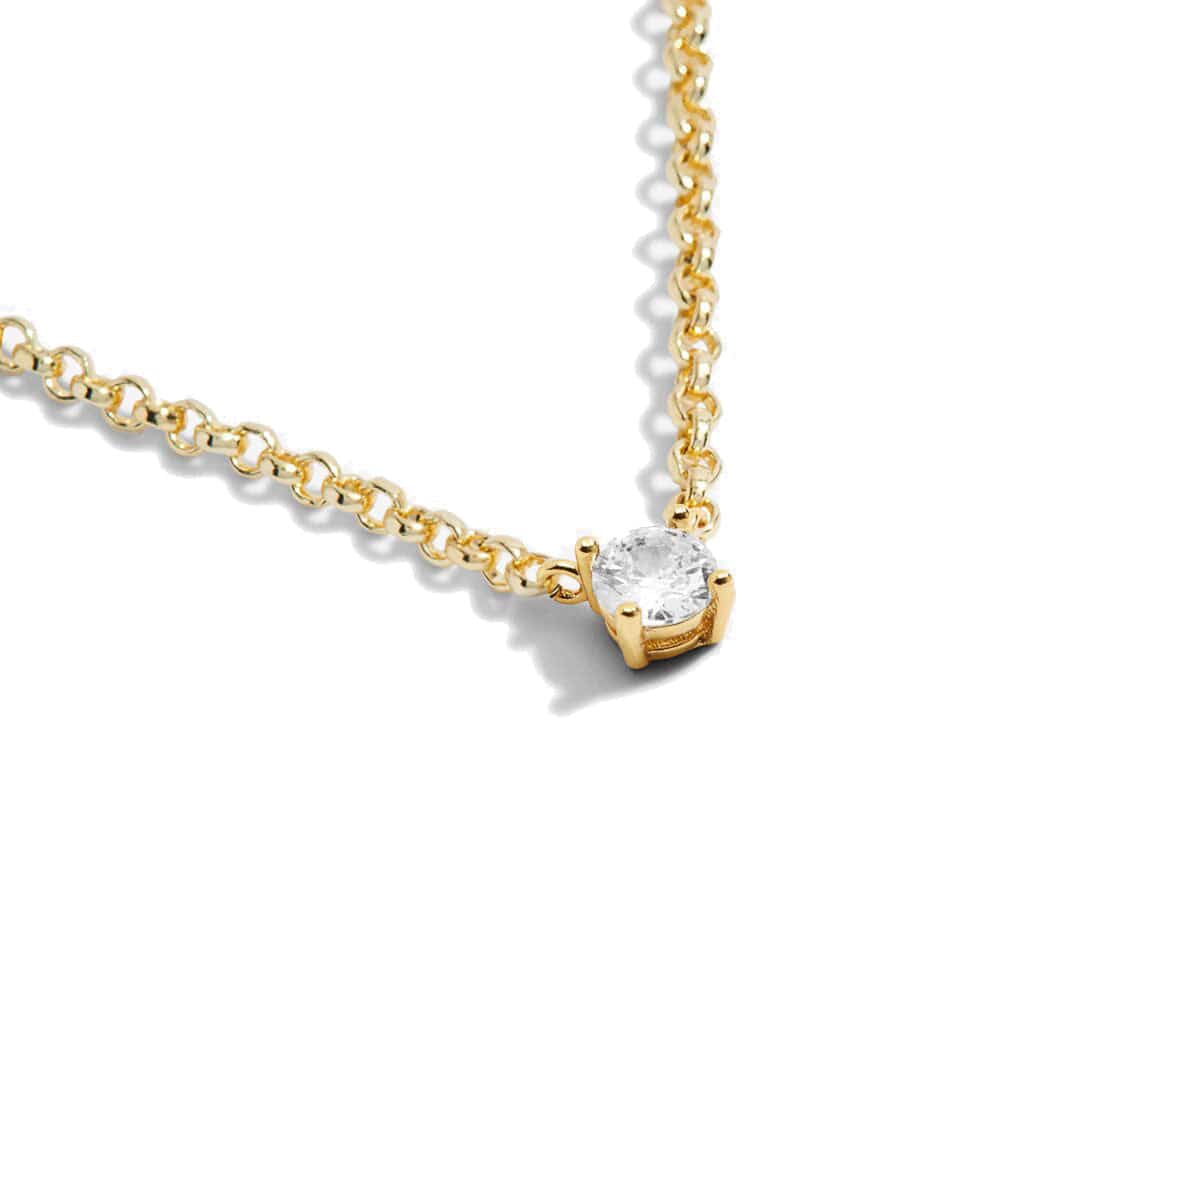 Joma Jewellery Necklace Joma Jewellery A Little Love From Your Little One Necklace